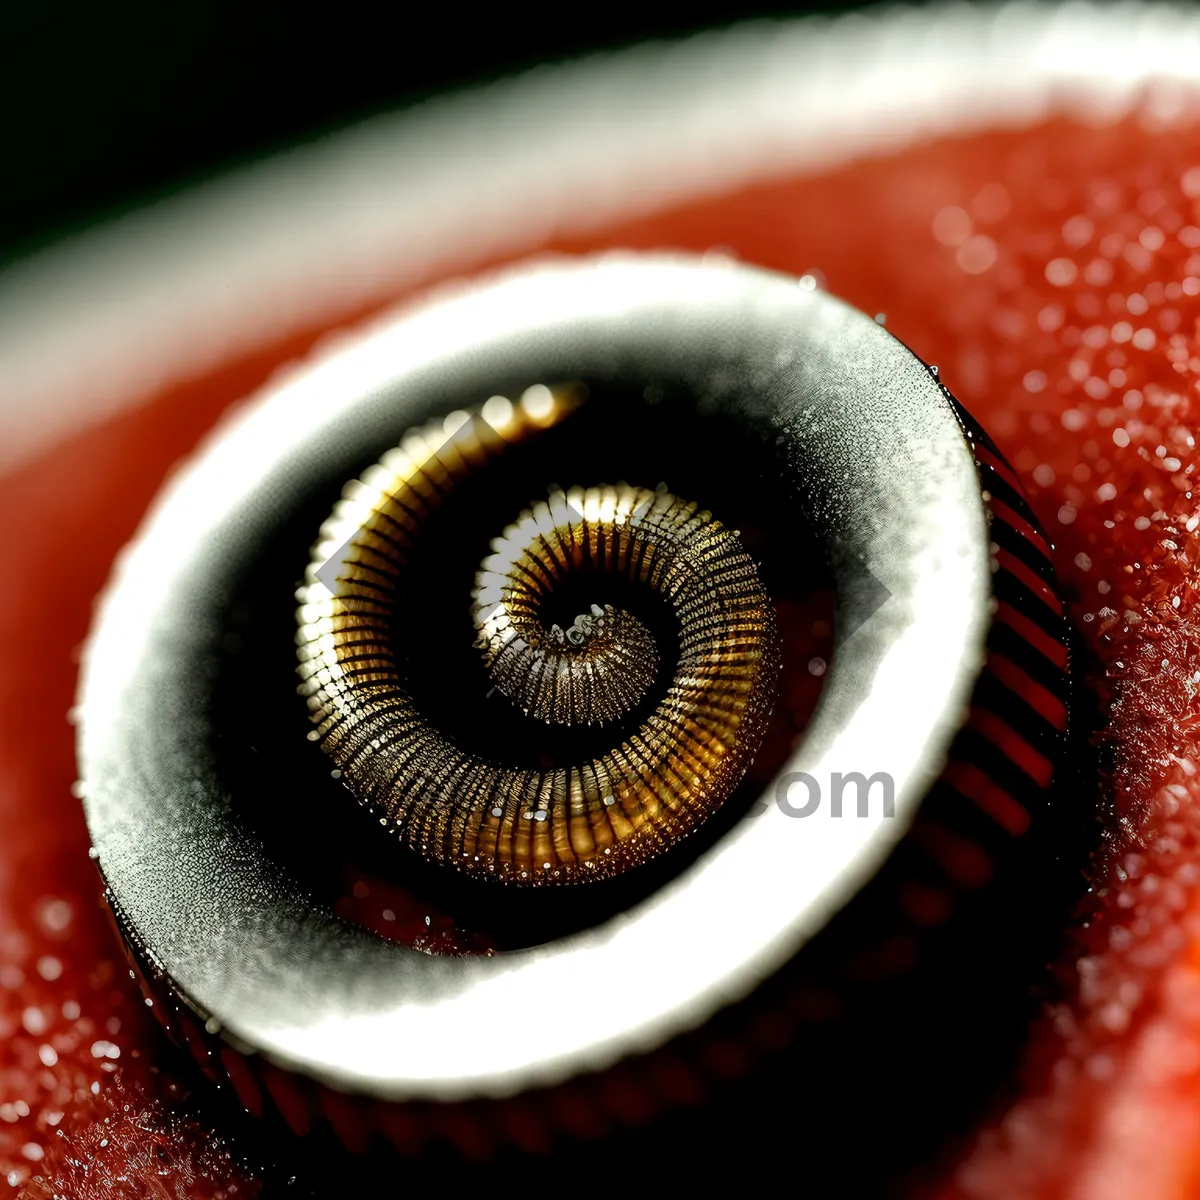 Picture of Kiwi Fruit Coil: Nutrition-packed arthropod intertwines with delicious fruit.